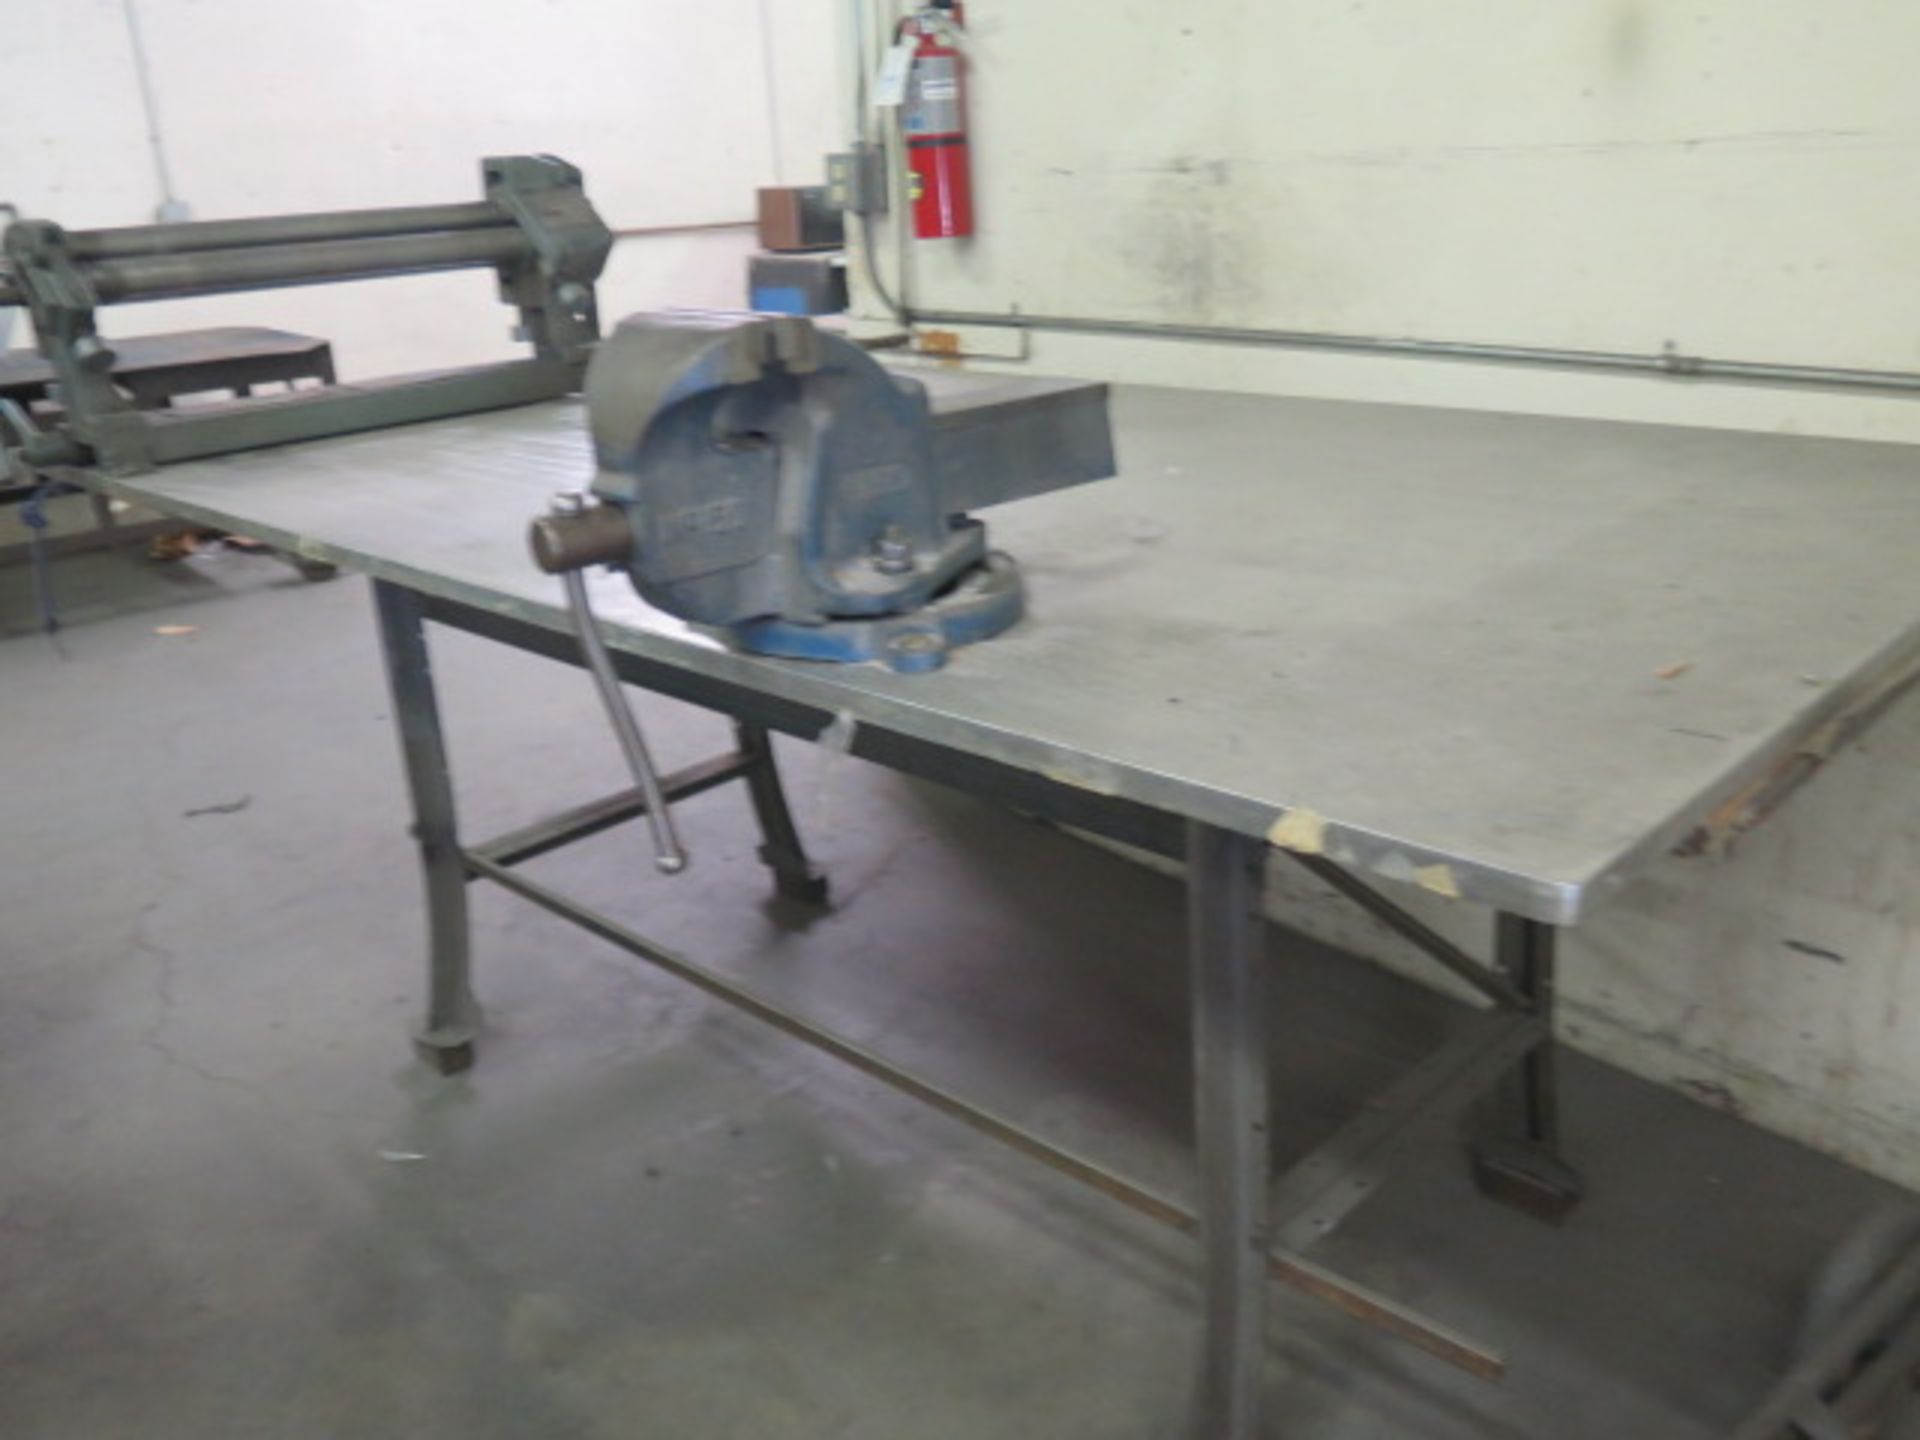 Pexto mdl. 383D 36" Hand Roll w/ 2" Rolls, Eron 6" Bench Vise w/ 48" x 80" x 3/4" Table, SOLD AS IS - Image 8 of 9